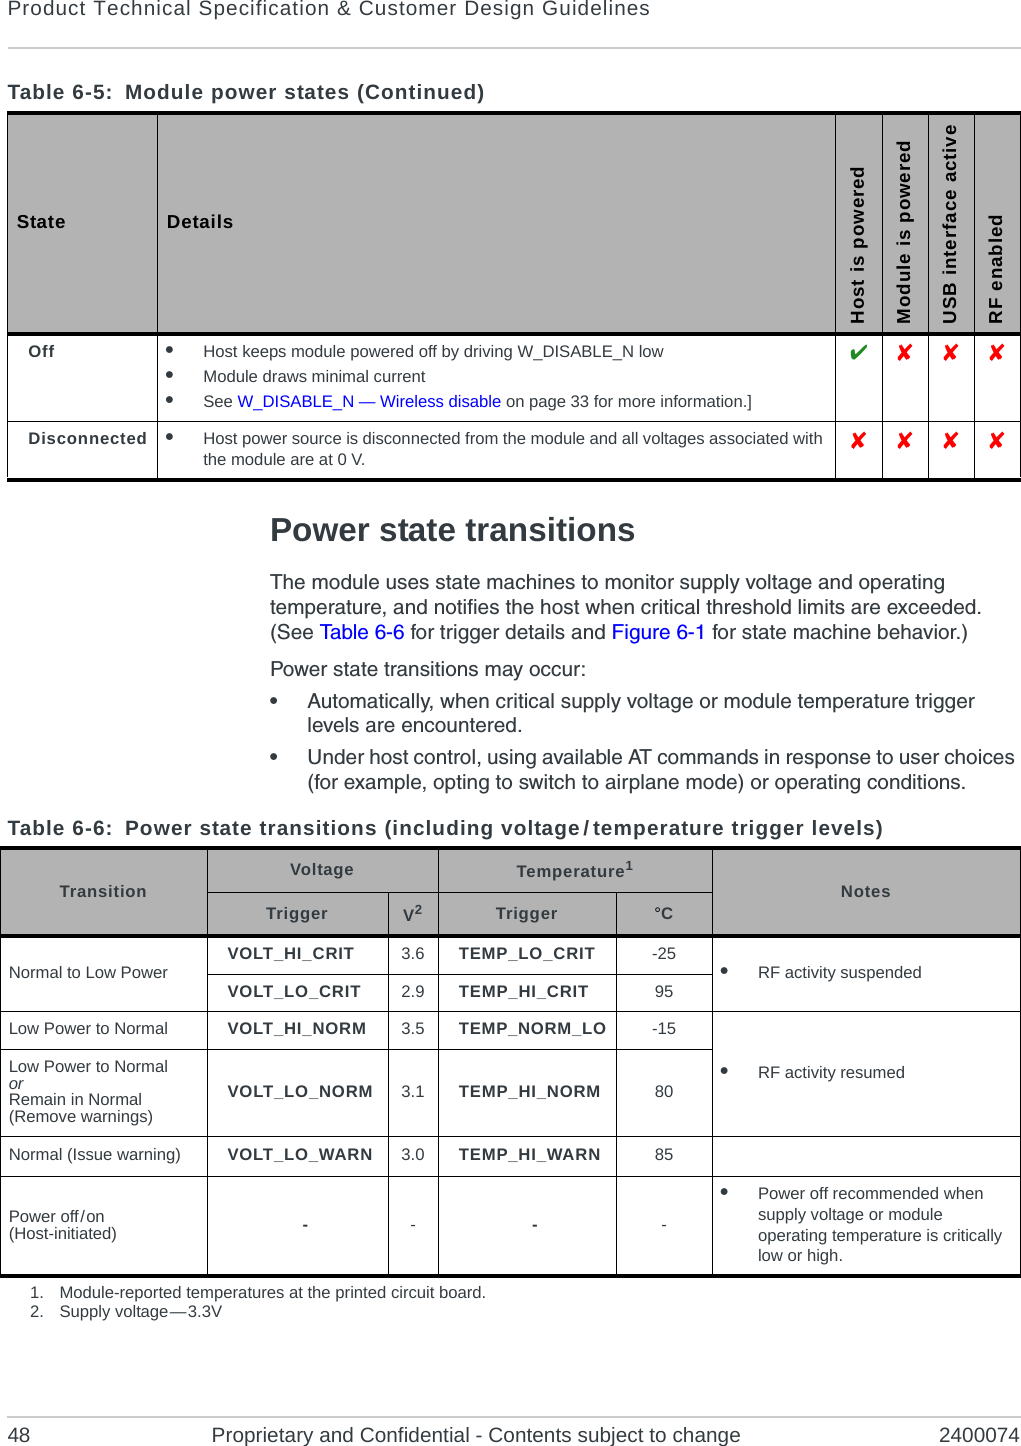 Product Technical Specification &amp; Customer Design Guidelines48 Proprietary and Confidential - Contents subject to change 2400074Power state transitionsThe module uses state machines to monitor supply voltage and operating temperature, and notifies the host when critical threshold limits are exceeded. (See Tabl e 6-6 for trigger details and Figure 6-1 for state machine behavior.)Power state transitions may occur:•Automatically, when critical supply voltage or module temperature trigger levels are encountered.•Under host control, using available AT commands in response to user choices (for example, opting to switch to airplane mode) or operating conditions.Off •Host keeps module powered off by driving W_DISABLE_N low•Module draws minimal current•See W_DISABLE_N — Wireless disable on page 33 for more information.]  Disconnected •Host power source is disconnected from the module and all voltages associated with the module are at 0 V.   Table 6-5:  Module power states (Continued)State DetailsHost is poweredModule is poweredUSB interface activeRF enabledTable 6-6: Power state transitions (including voltage / temperature trigger levels)Transition Voltage Temperature1Notes Trigger V2Trigger °CNormal to Low Power VOLT_HI_CRIT 3.6 TEMP_LO_CRIT -25 •RF activity suspendedVOLT_LO_CRIT 2.9 TEMP_HI_CRIT 95Low Power to Normal VOLT_HI_NORM 3.5 TEMP_NORM_LO -15•RF activity resumedLow Power to NormalorRemain in Normal (Remove warnings)VOLT_LO_NORM 3.1 TEMP_HI_NORM 80Normal (Issue warning) VOLT_LO_WARN 3.0 TEMP_HI_WARN 85Power off / on(Host-initiated) ----•Power off recommended when supply voltage or module operating temperature is critically low or high.1. Module-reported temperatures at the printed circuit board.2. Supply  voltage — 3.3V